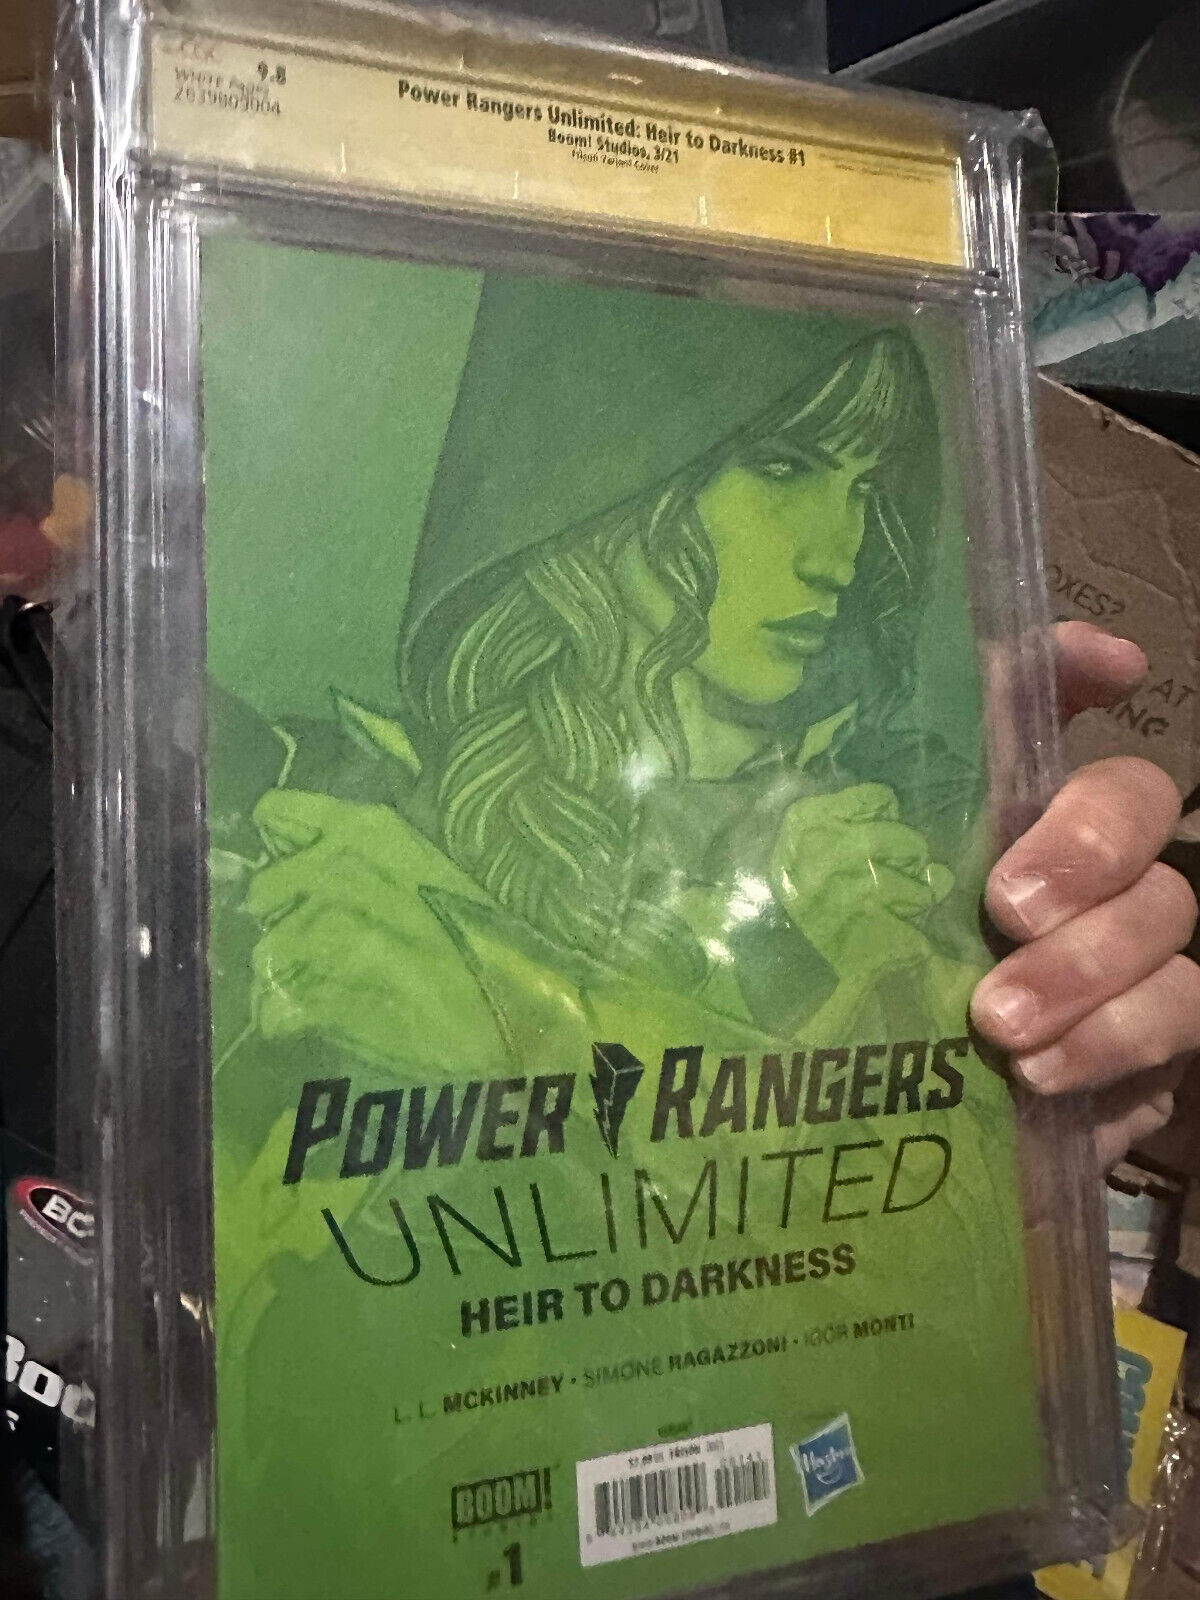 Power Rangers Unlimited Heir To Darkness #1 CGC 9.8 SS Frison Virgin Variant